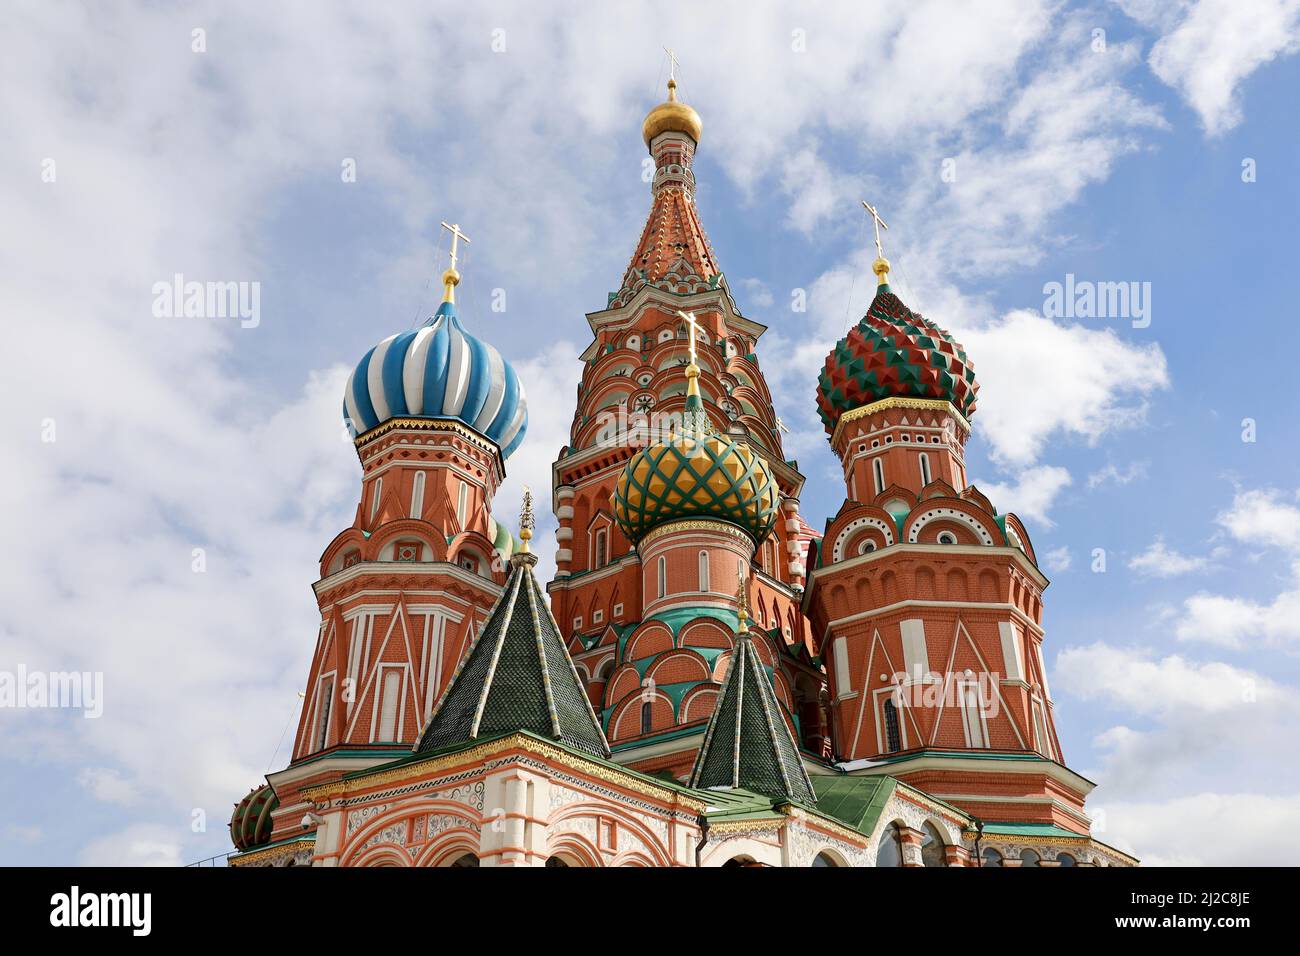 St. Basil's Cathedral against the blue sky and white clouds. Russian tourist landmark on Red Square in Moscow Stock Photo